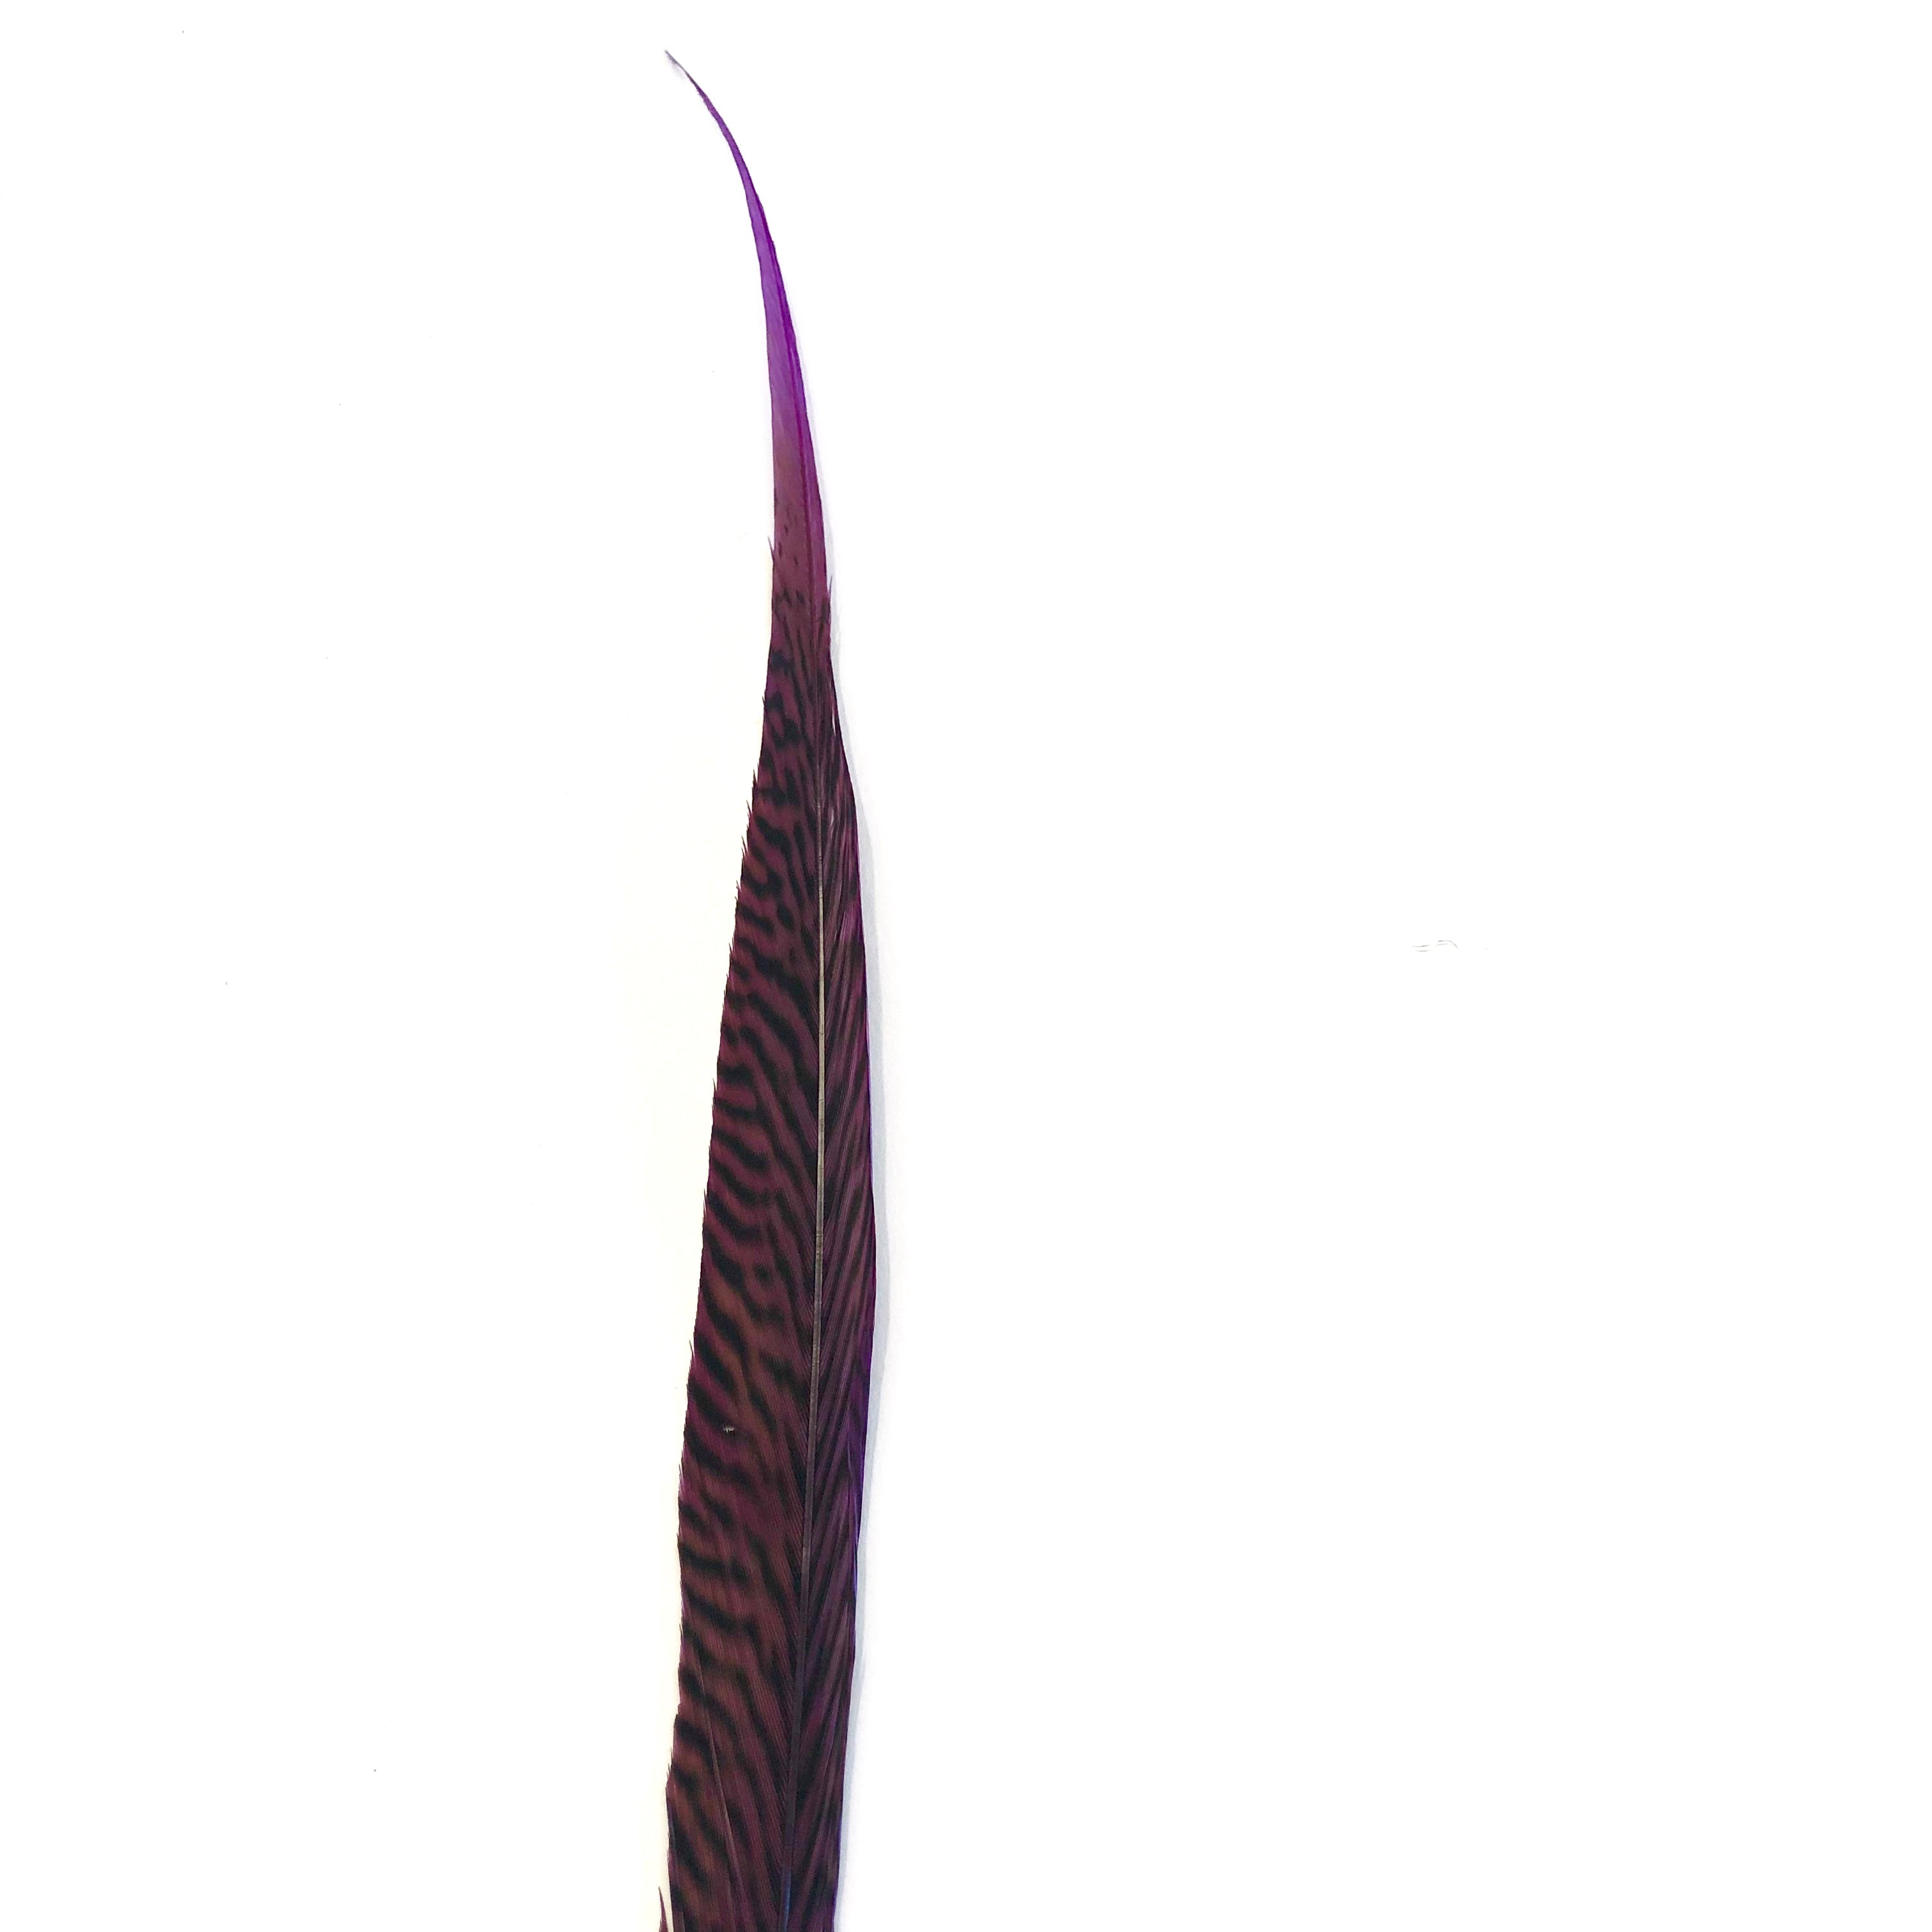 10" to 20" Golden Pheasant Side Tail Feather - Eggplant ((SECONDS))